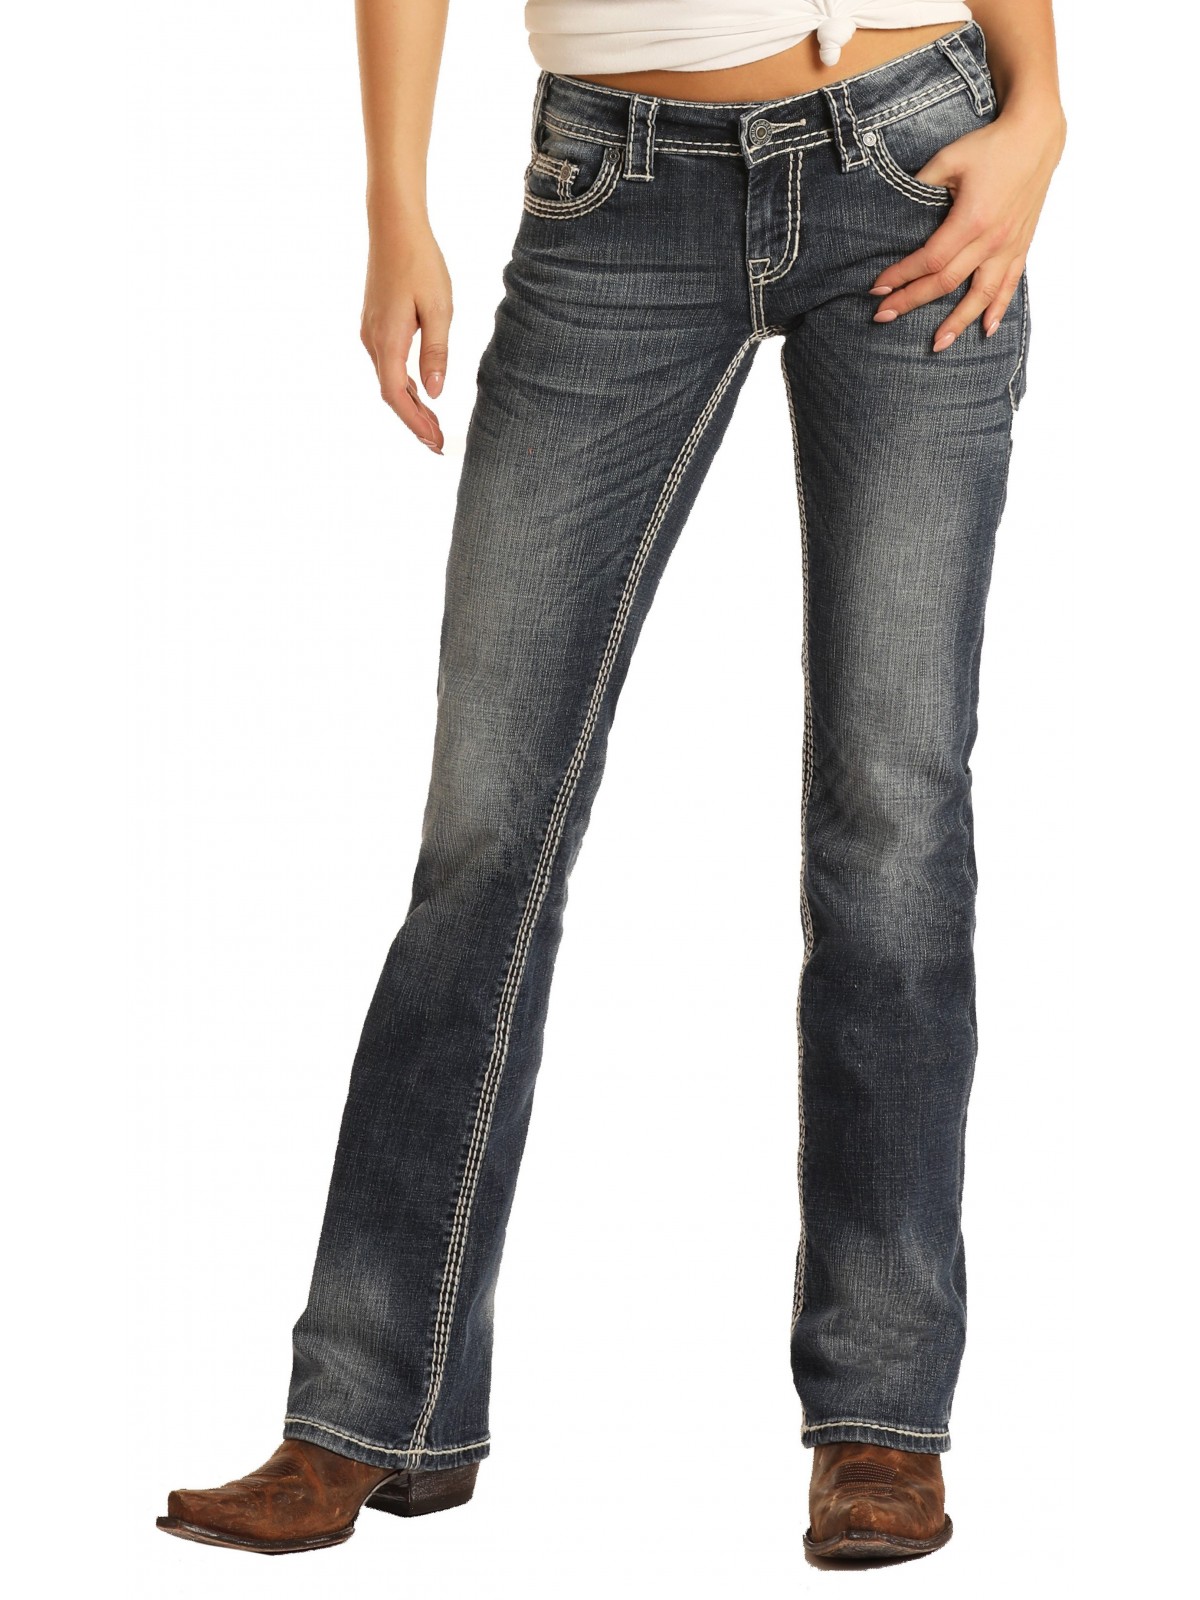 Mid Rise Bootcut Riding Jeans 9516